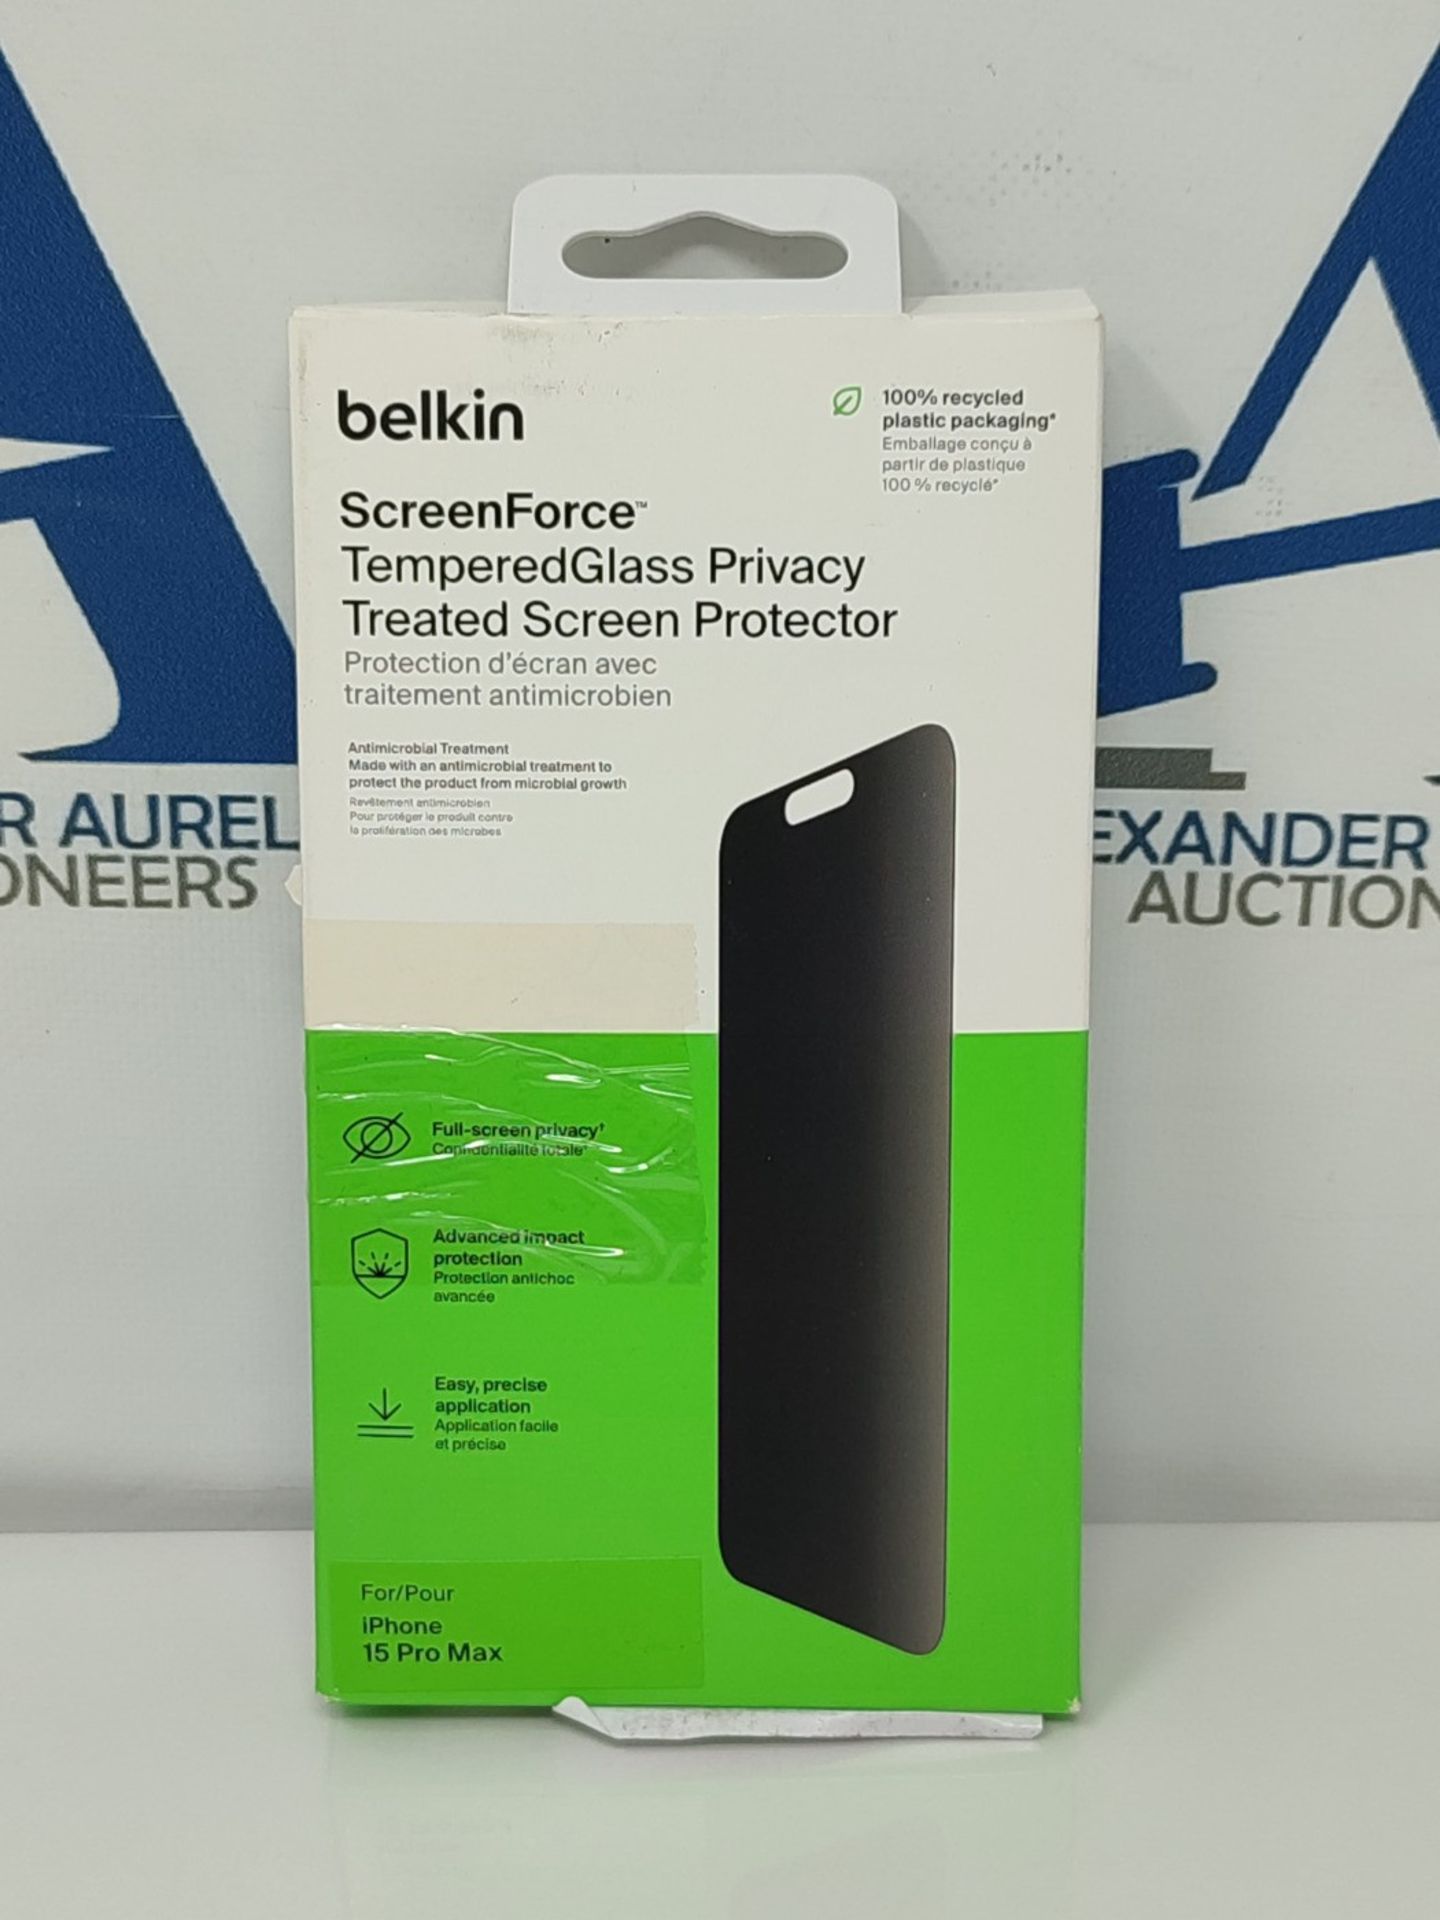 Belkin ScreenForce TemperedGlass Treated Privacy Screen Protector for iPhone 15 Pro Ma - Bild 2 aus 3